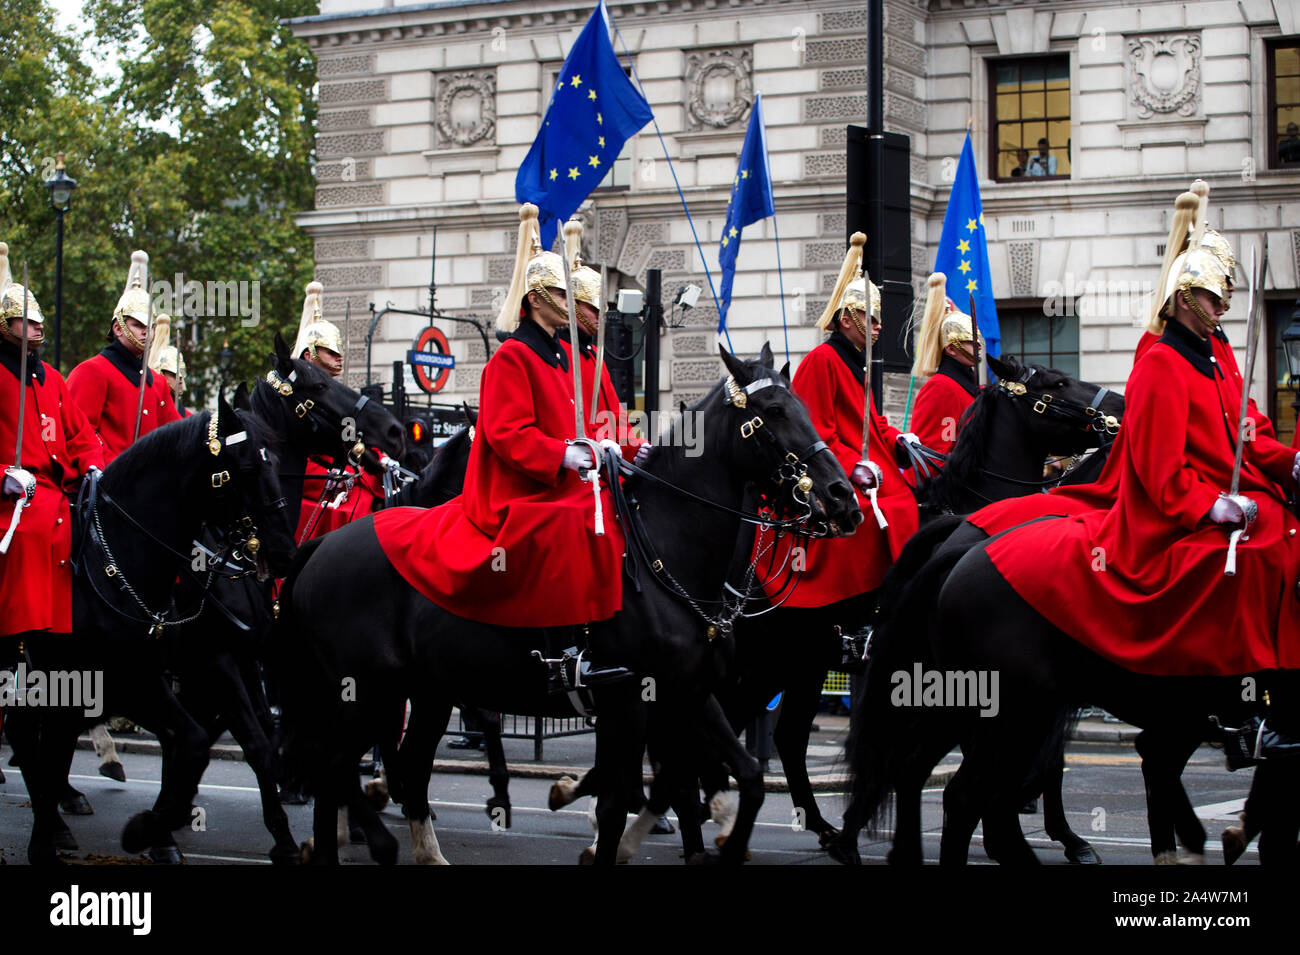 London, Westminster October 14th 2019 State Opening of Parliament. Mounted Horseguards ride in front of European flags. Stock Photo